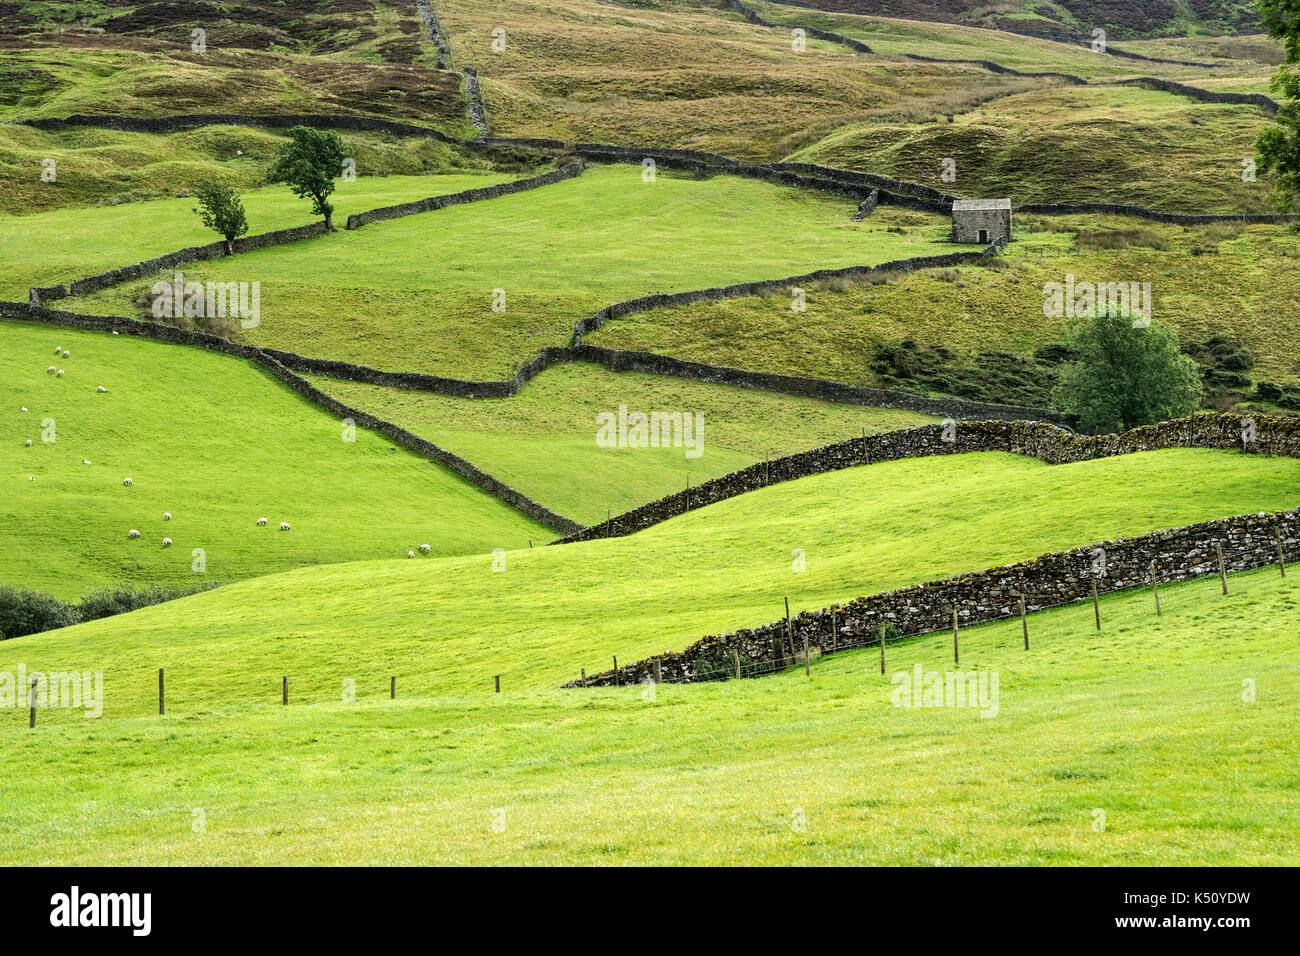 A Traditional Yorkshire Dales Farming Landscape of Dry Stone Walls, Fields and Stone Barn near Keld, Swaledale, Yorkshire Dales, UK Stock Photo